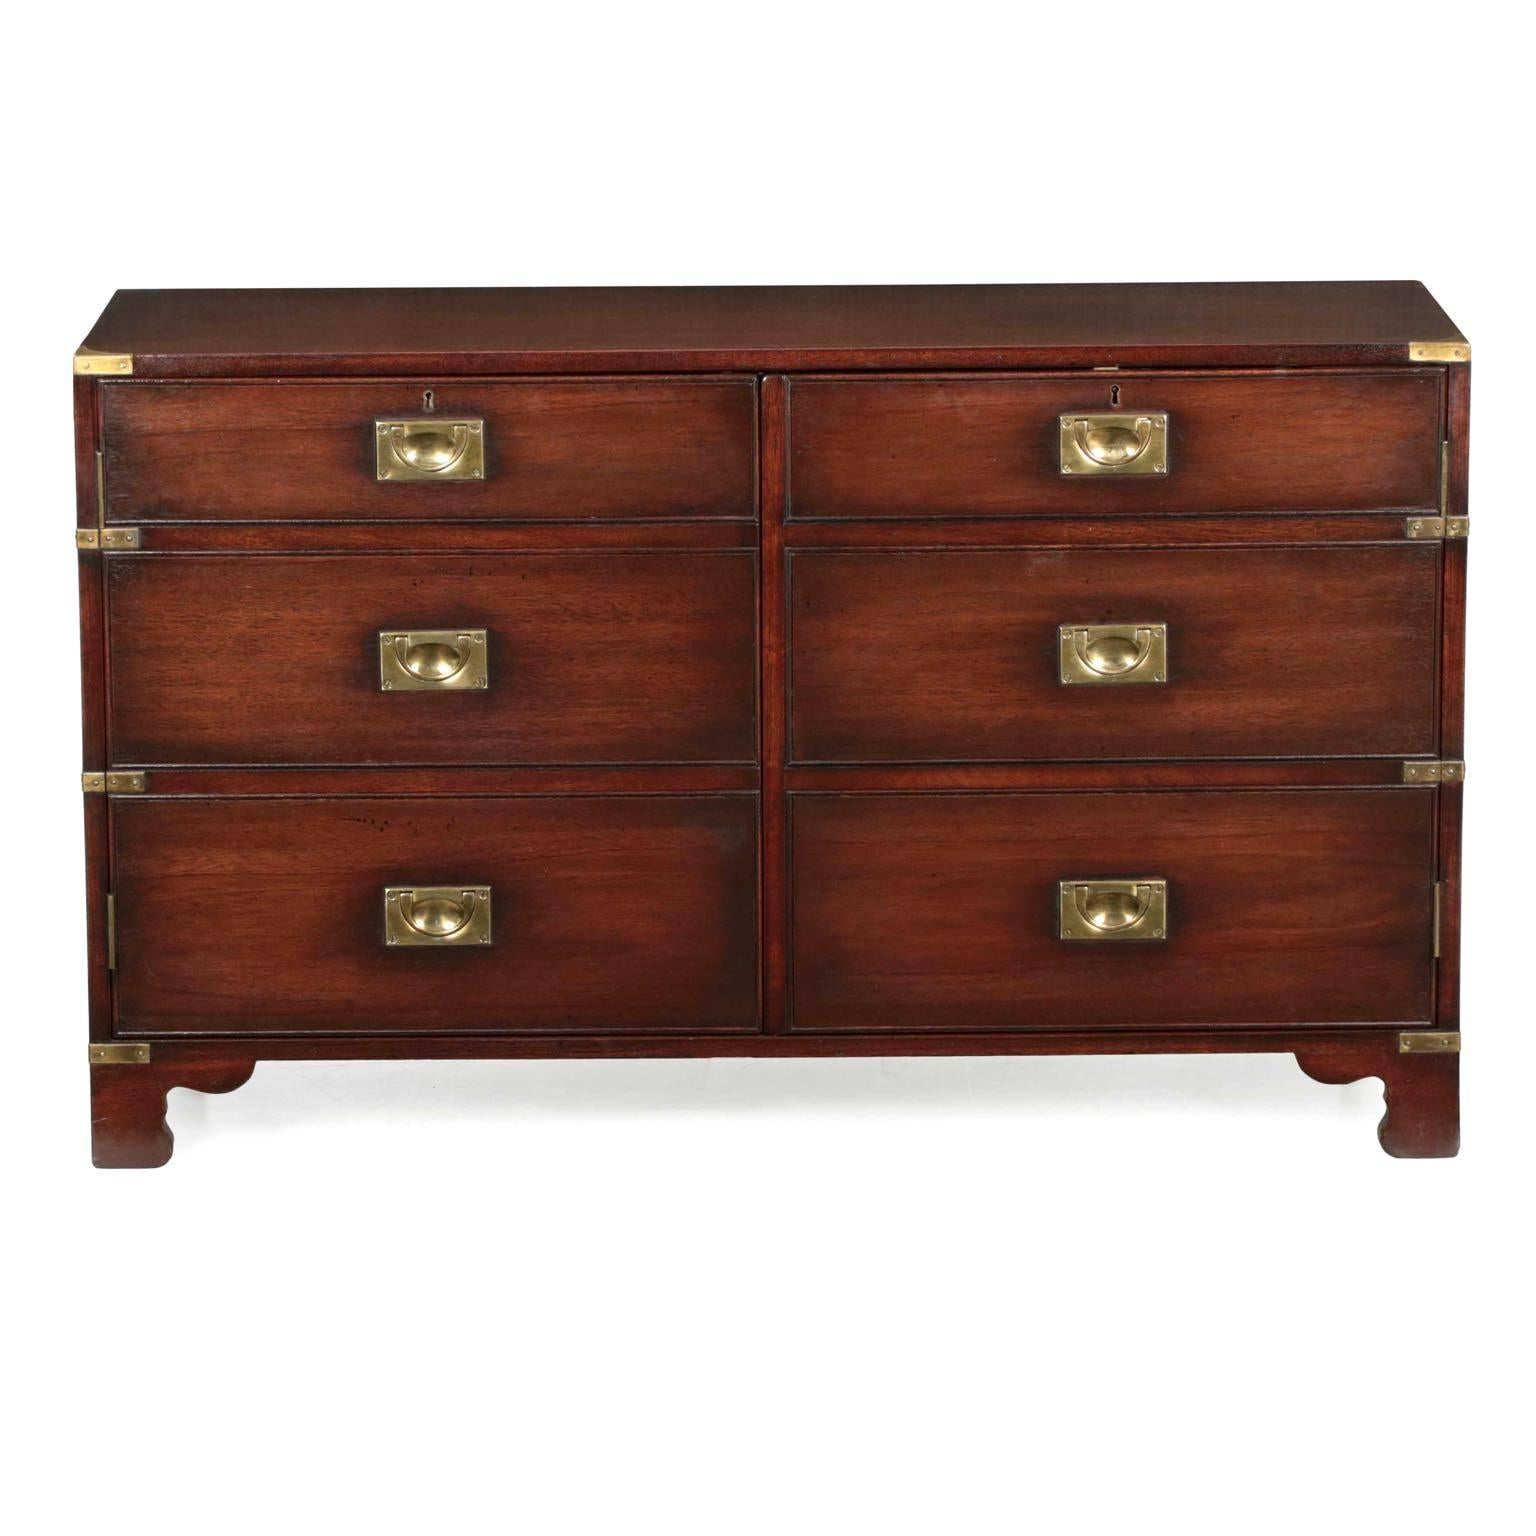 This very high quality cabinet crafted in the Campaign taste is such a striking element for the classical study. We acquired this cabinet along with a matching leather-top chest, side table, tall chest and green tooled-leather writing desk, making